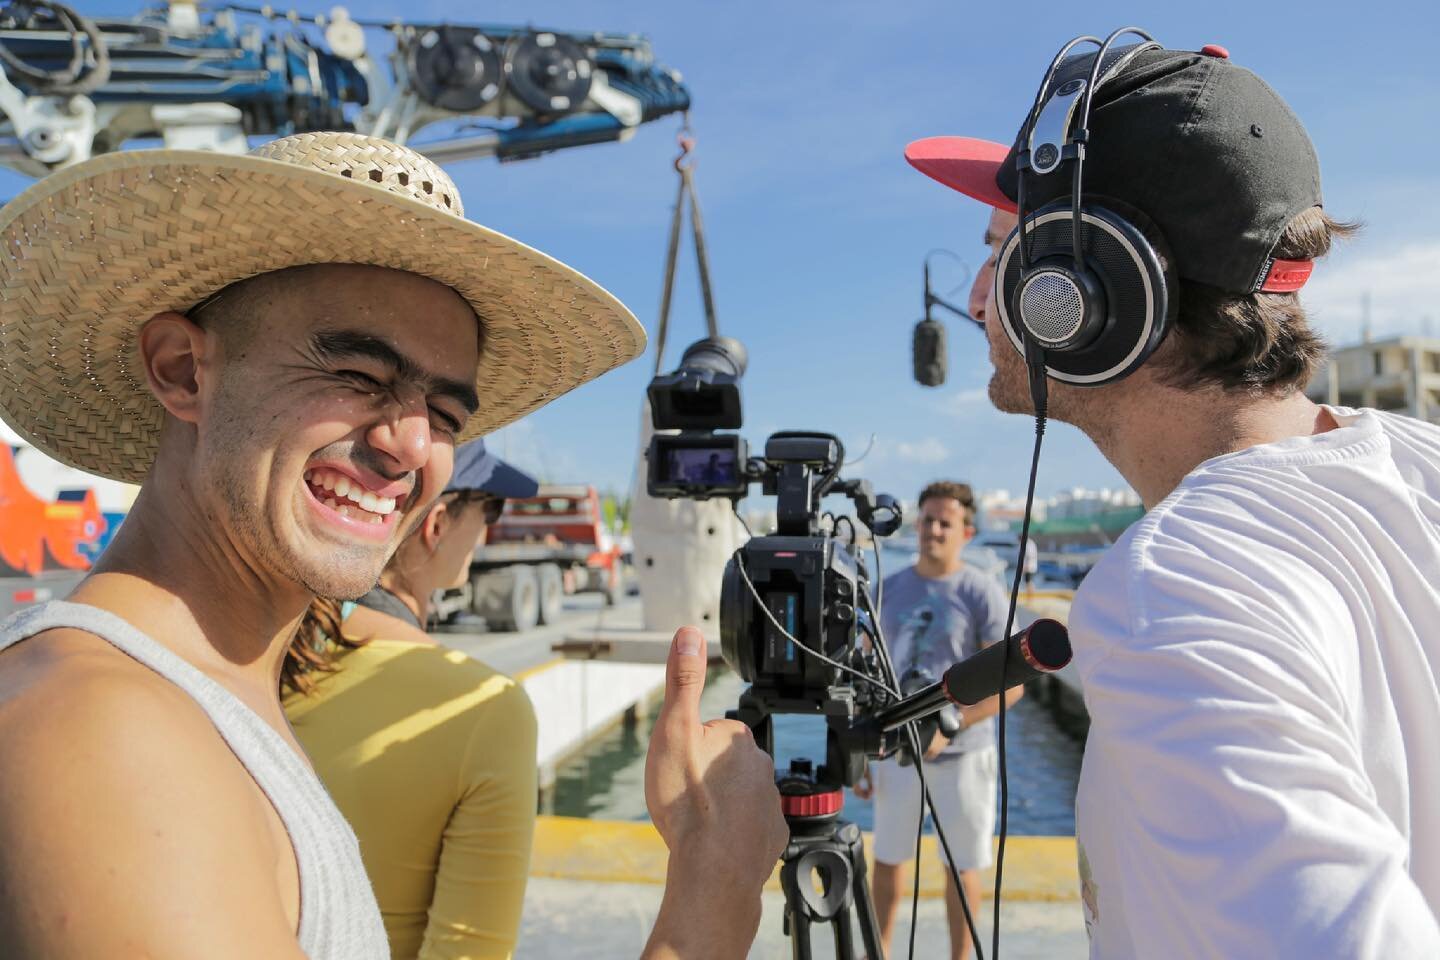 Behind the scenes from one of our productions in Cancun. Sometimes a production requires heading out into the ocean or even under water 🌊 These shots are from a coverage of the underwater museum in Cancun @musamuseo - with over 500 sculptures submer